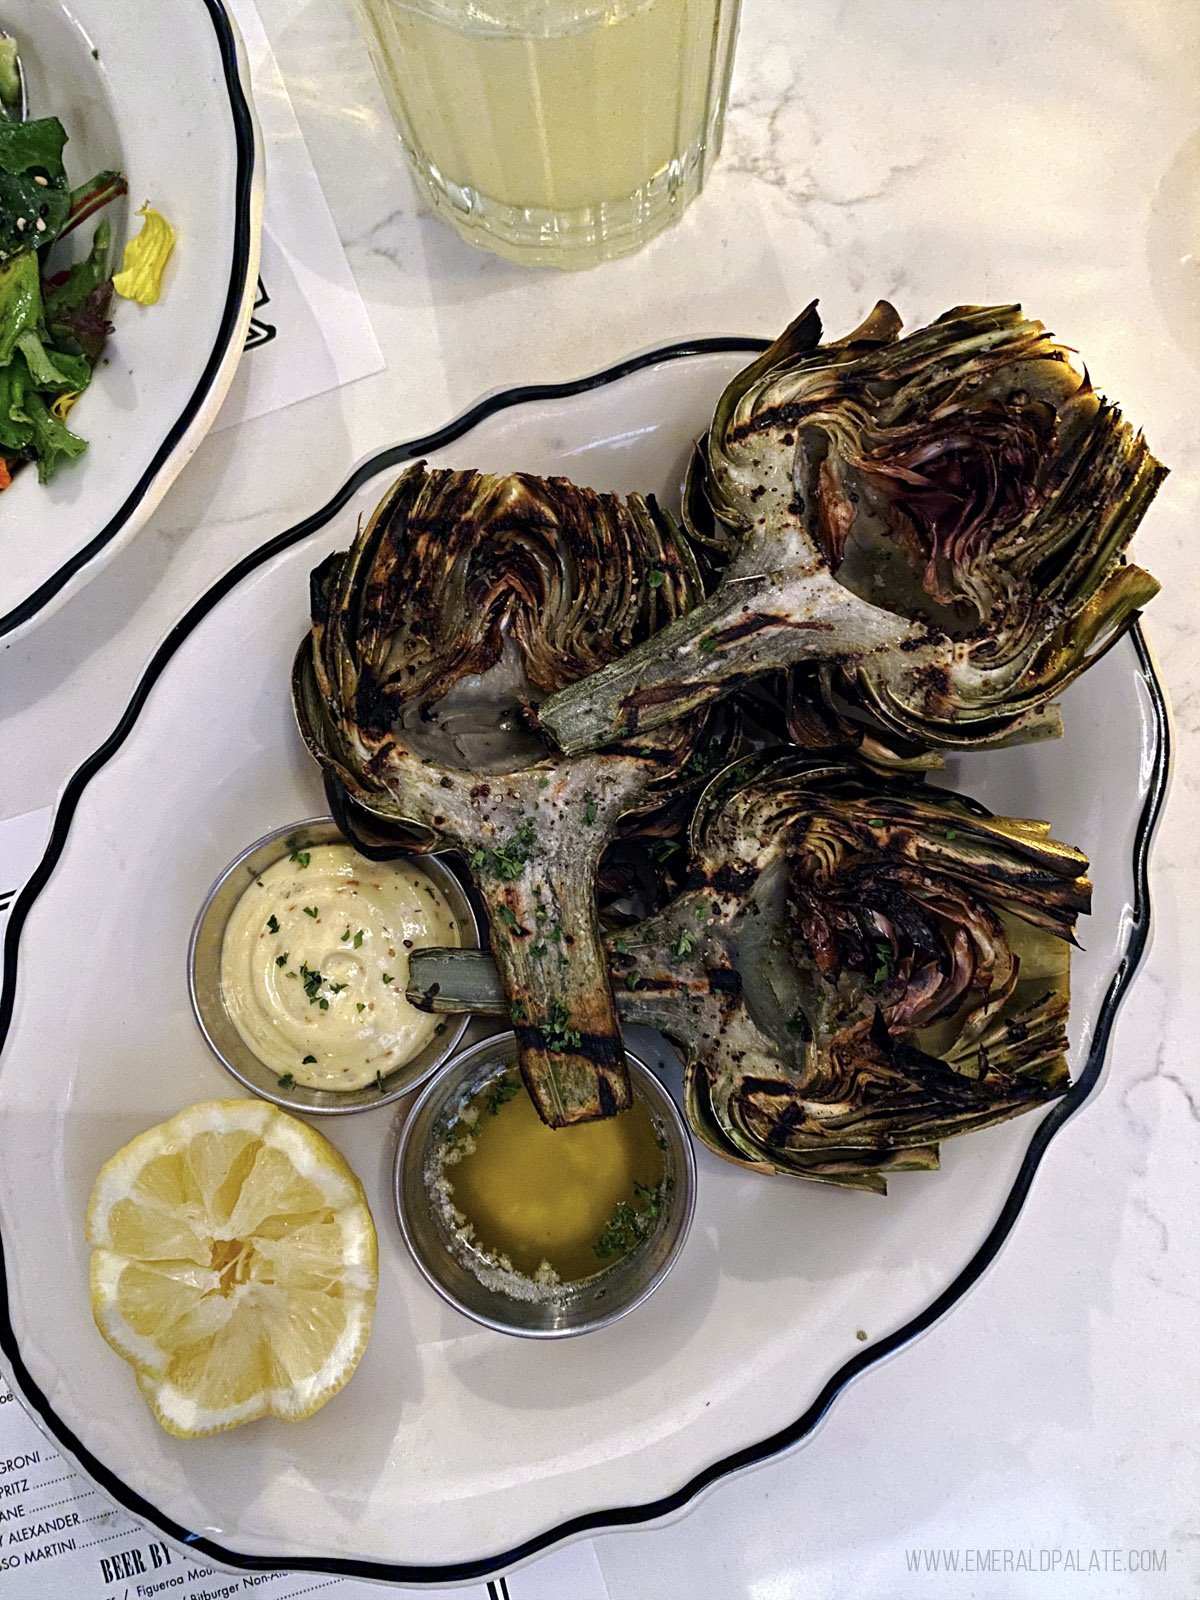 artichokes from Bar Cecil in Palm Springs